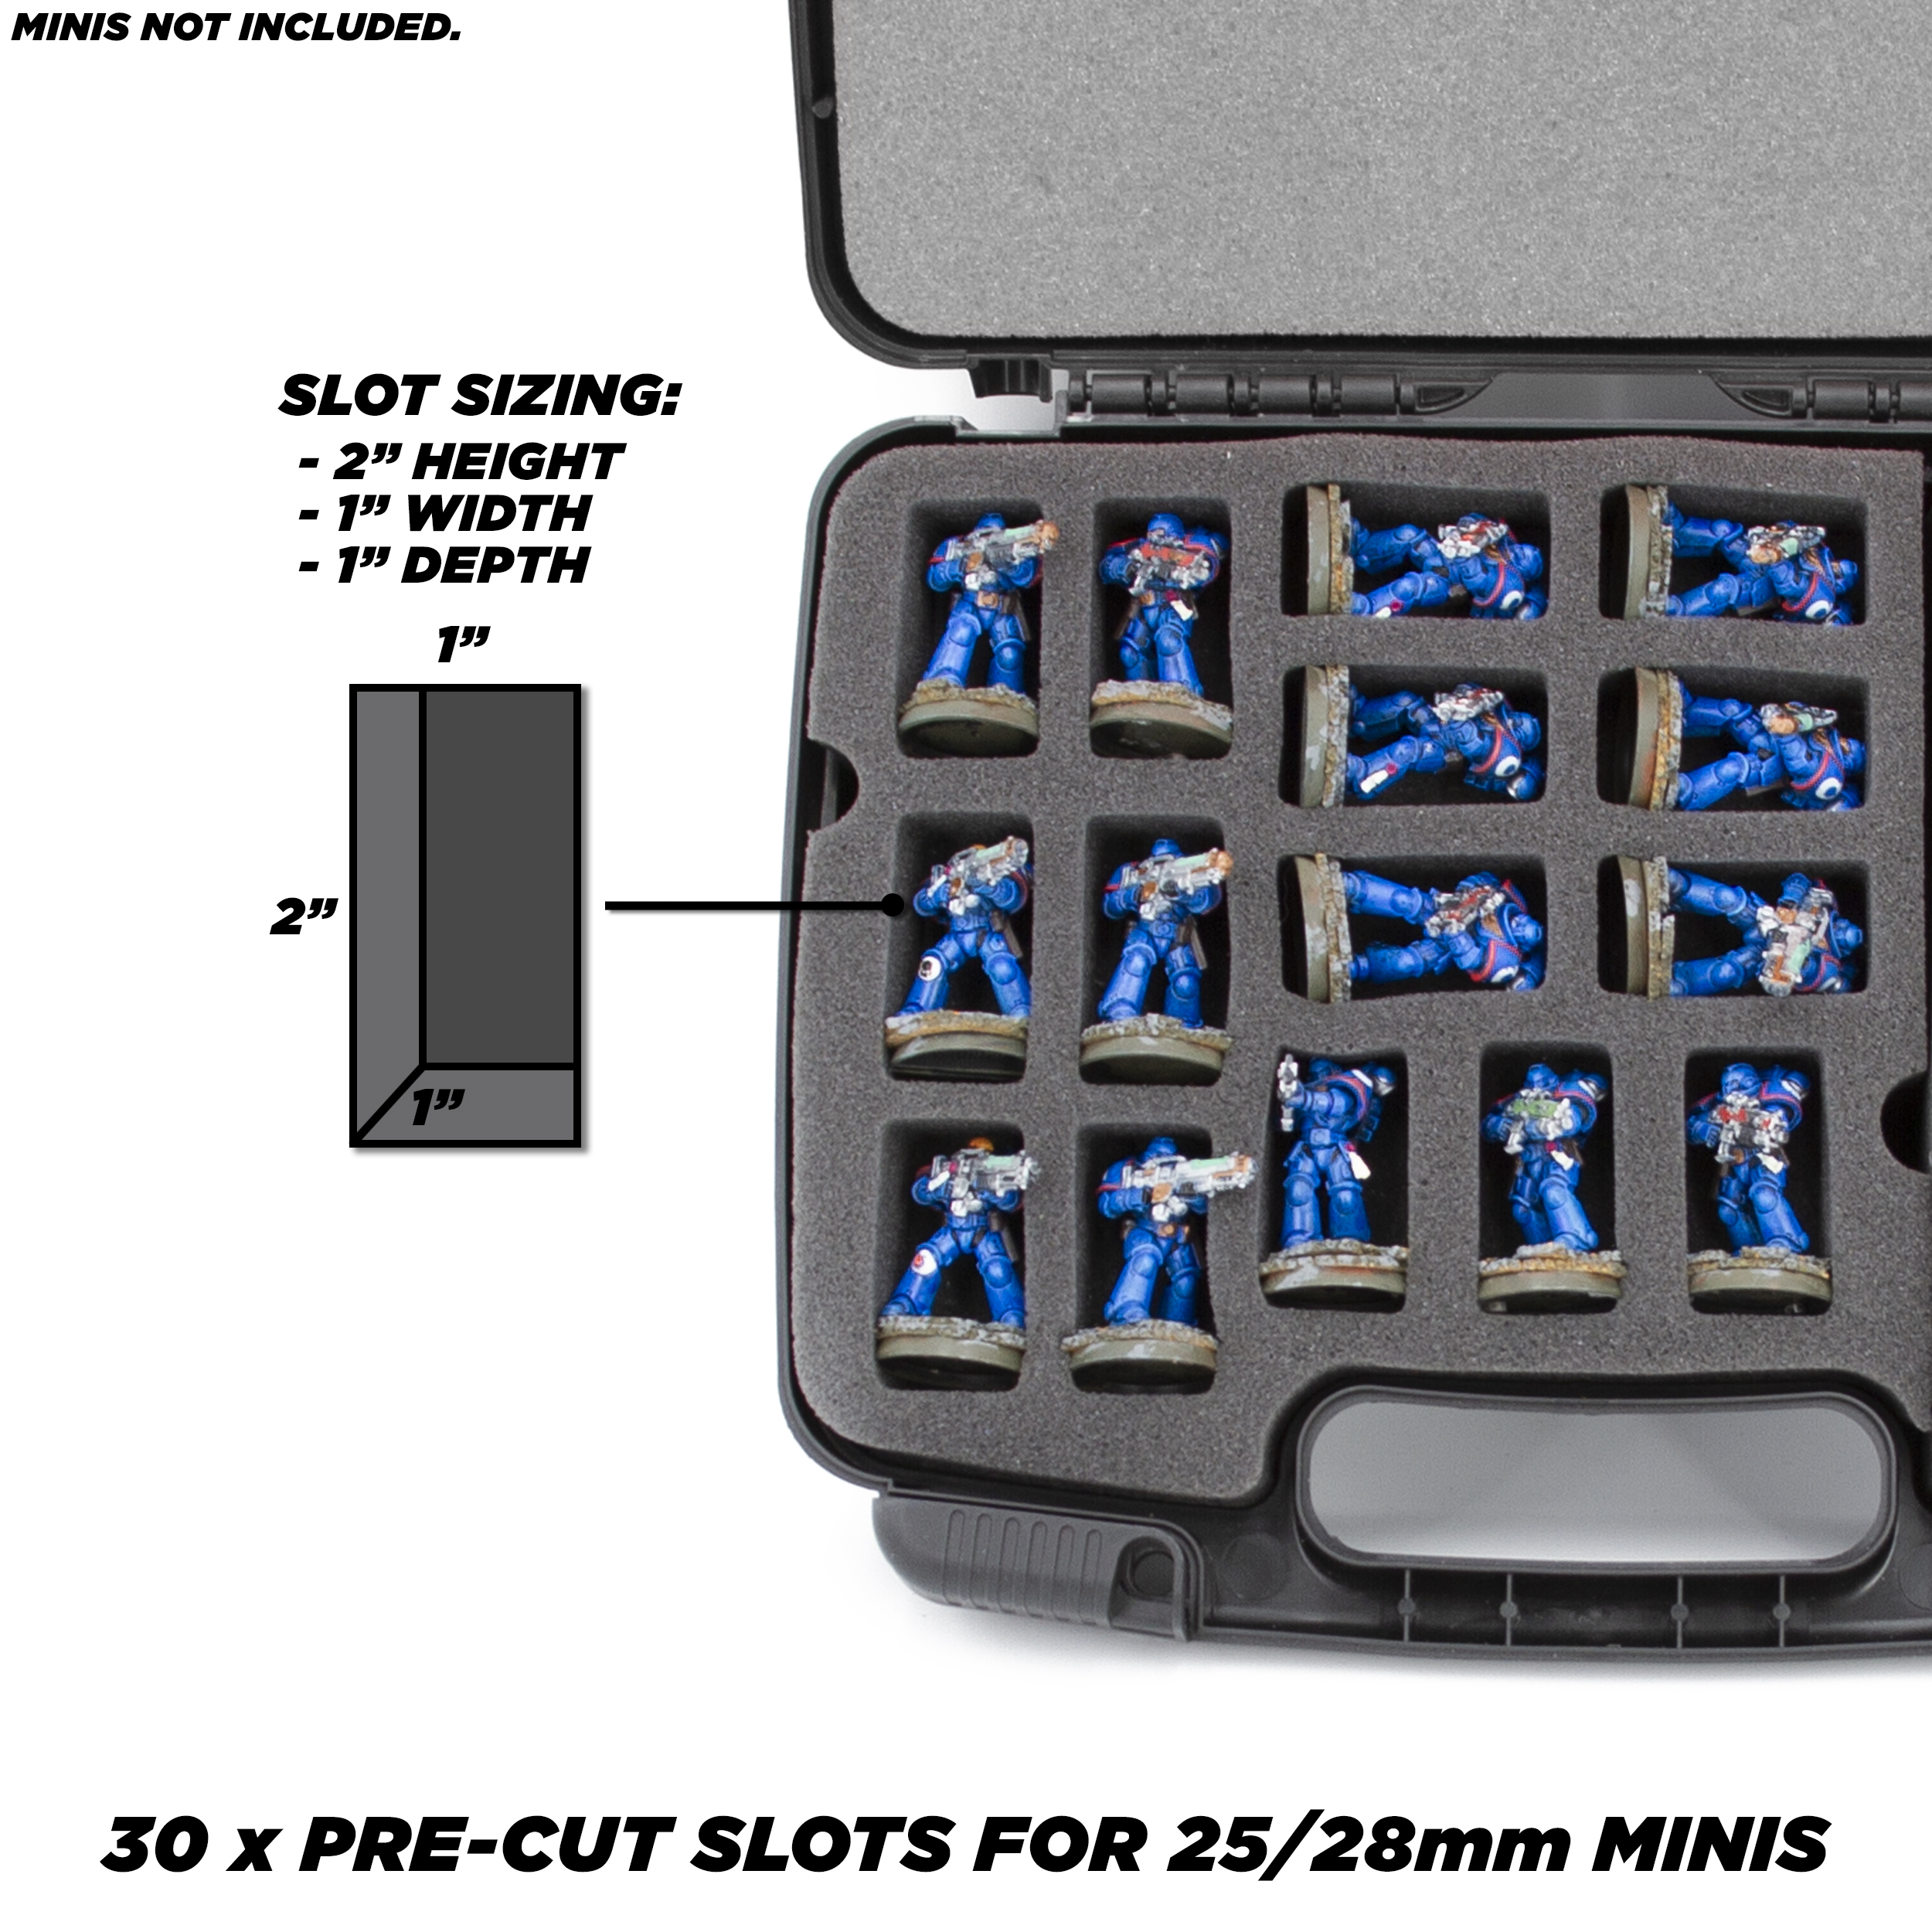 Casematix Miniature Figure Case - 30 Slot Figurine Miniature Carrying Case for Warhammer 40K, DND and More - Case Only, Size: One size, Black